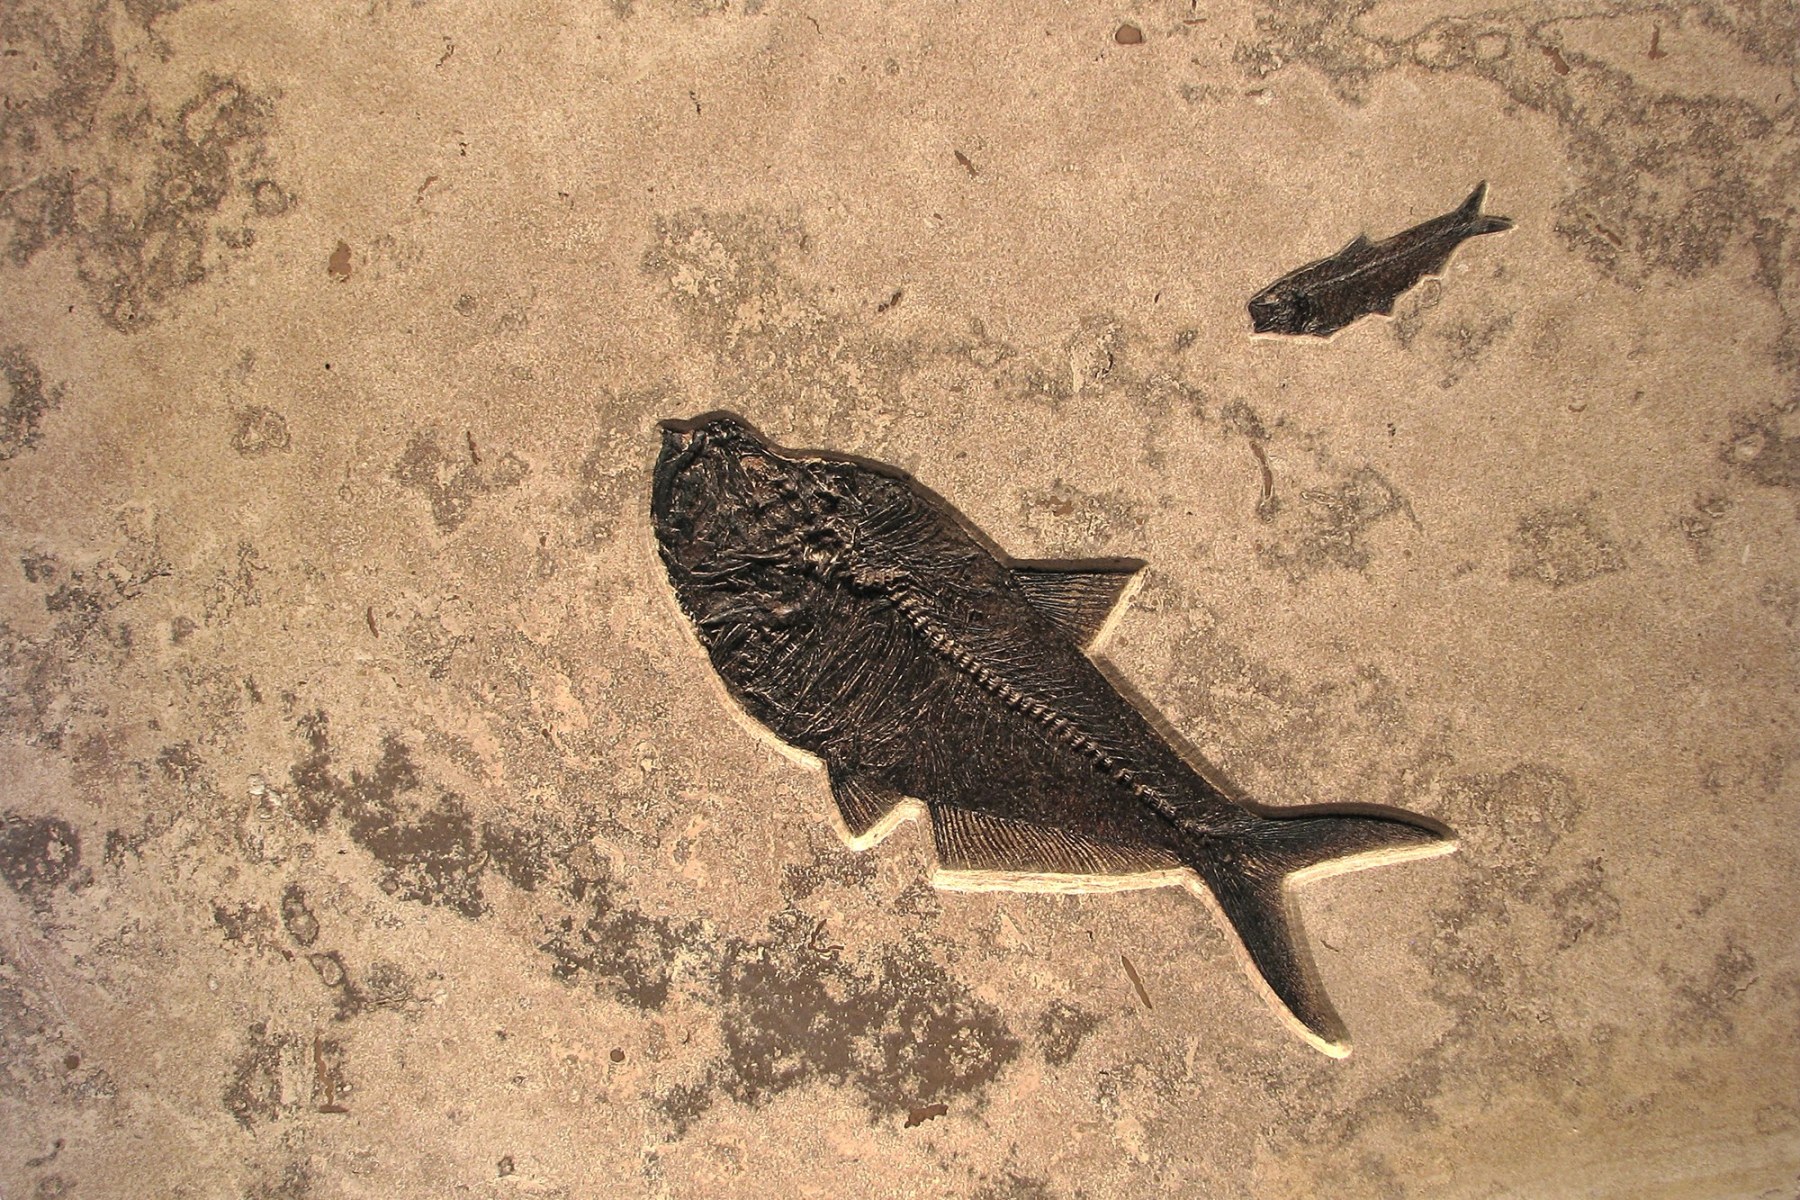 A 24" x 36" Fossil Fish Tile in a Combination Finish. The tile contains a large Diplomystus and a small Knightia